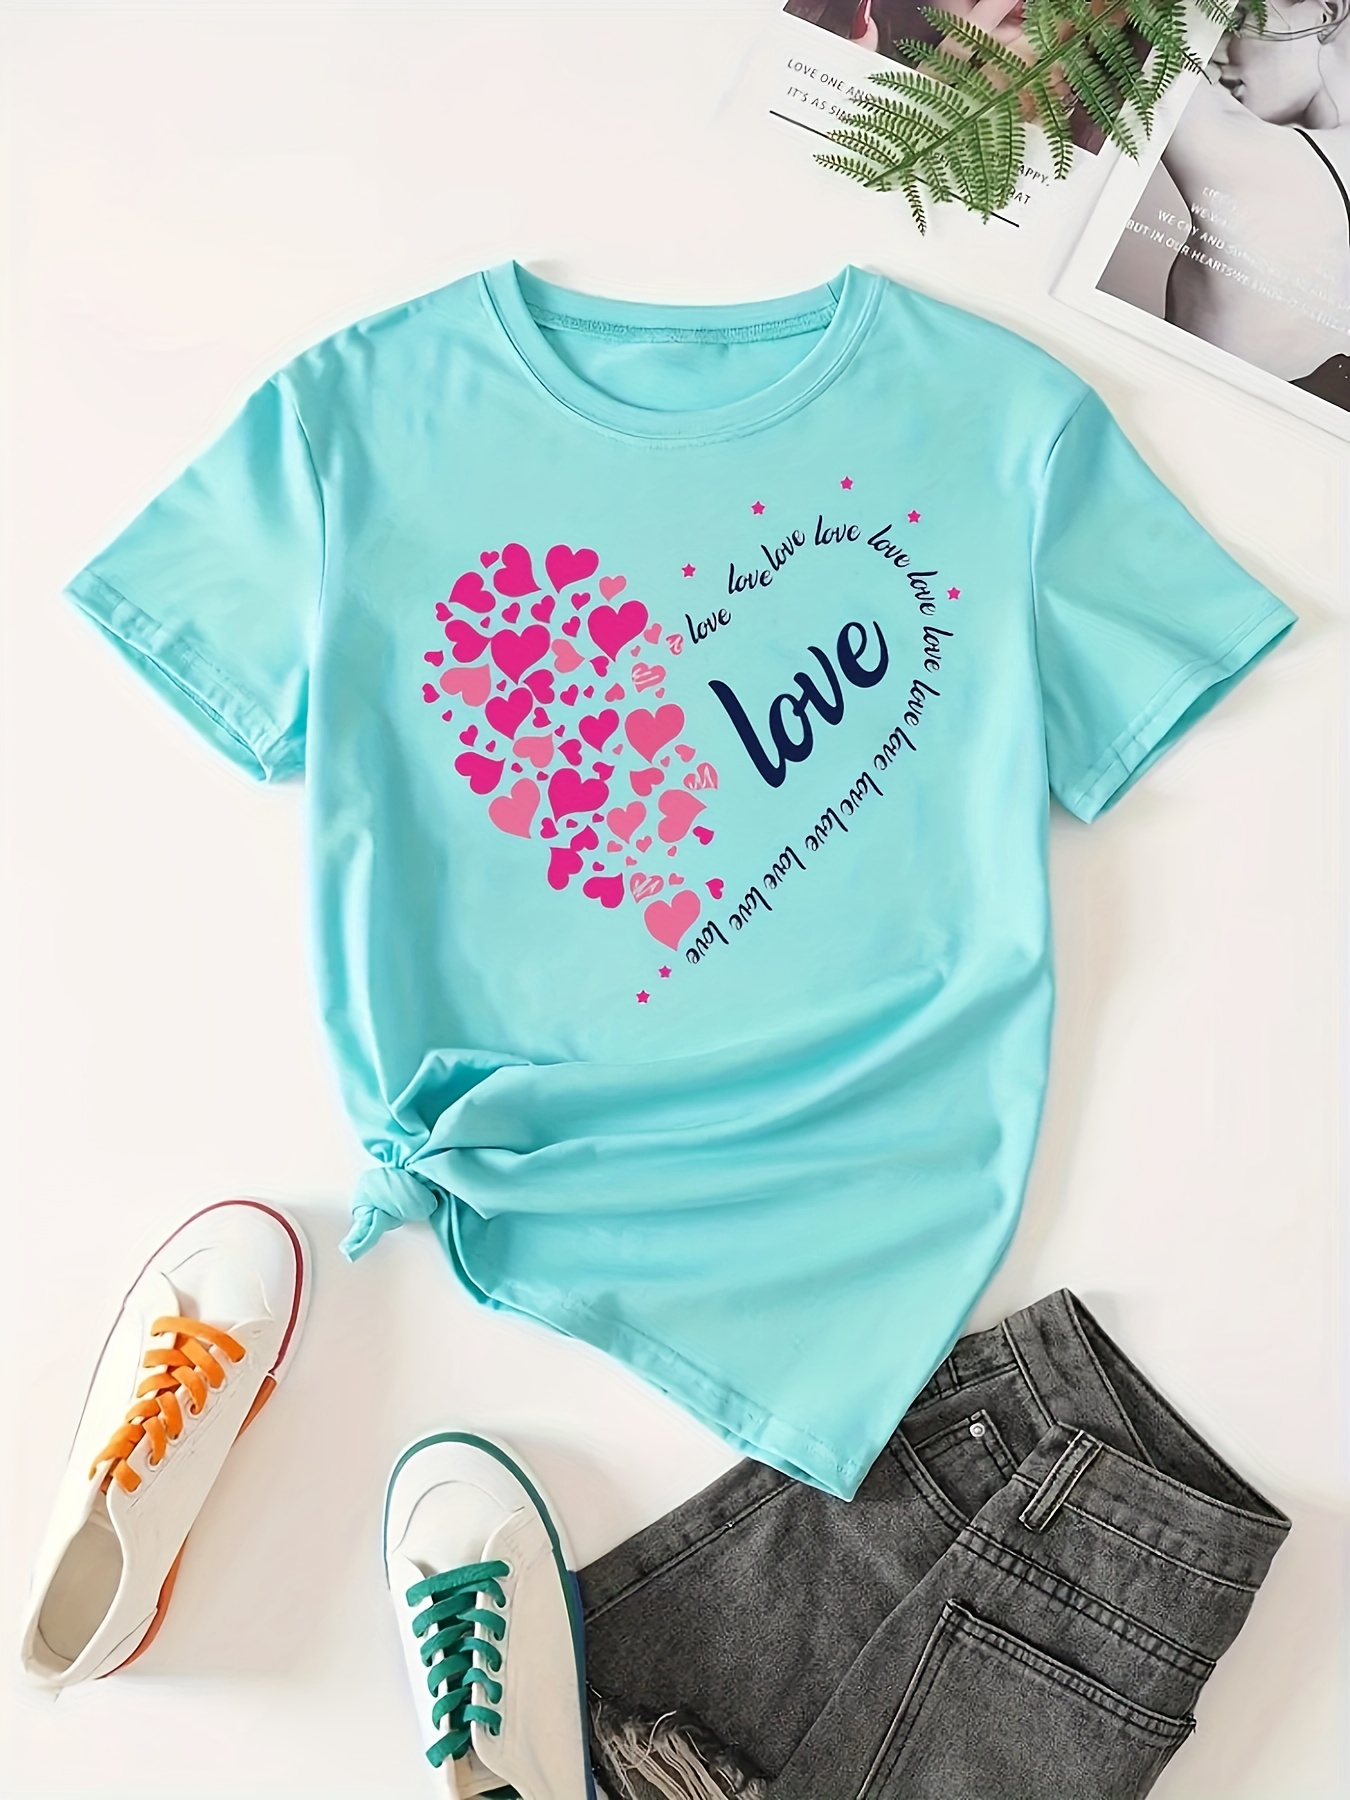  Rvidbe Valentines Day Tops for Women,Women's Casual Short  Sleeve Plaid Heart Print Graphic T Shirts Crewneck Tunic Blouses : Ropa,  Zapatos y Joyería